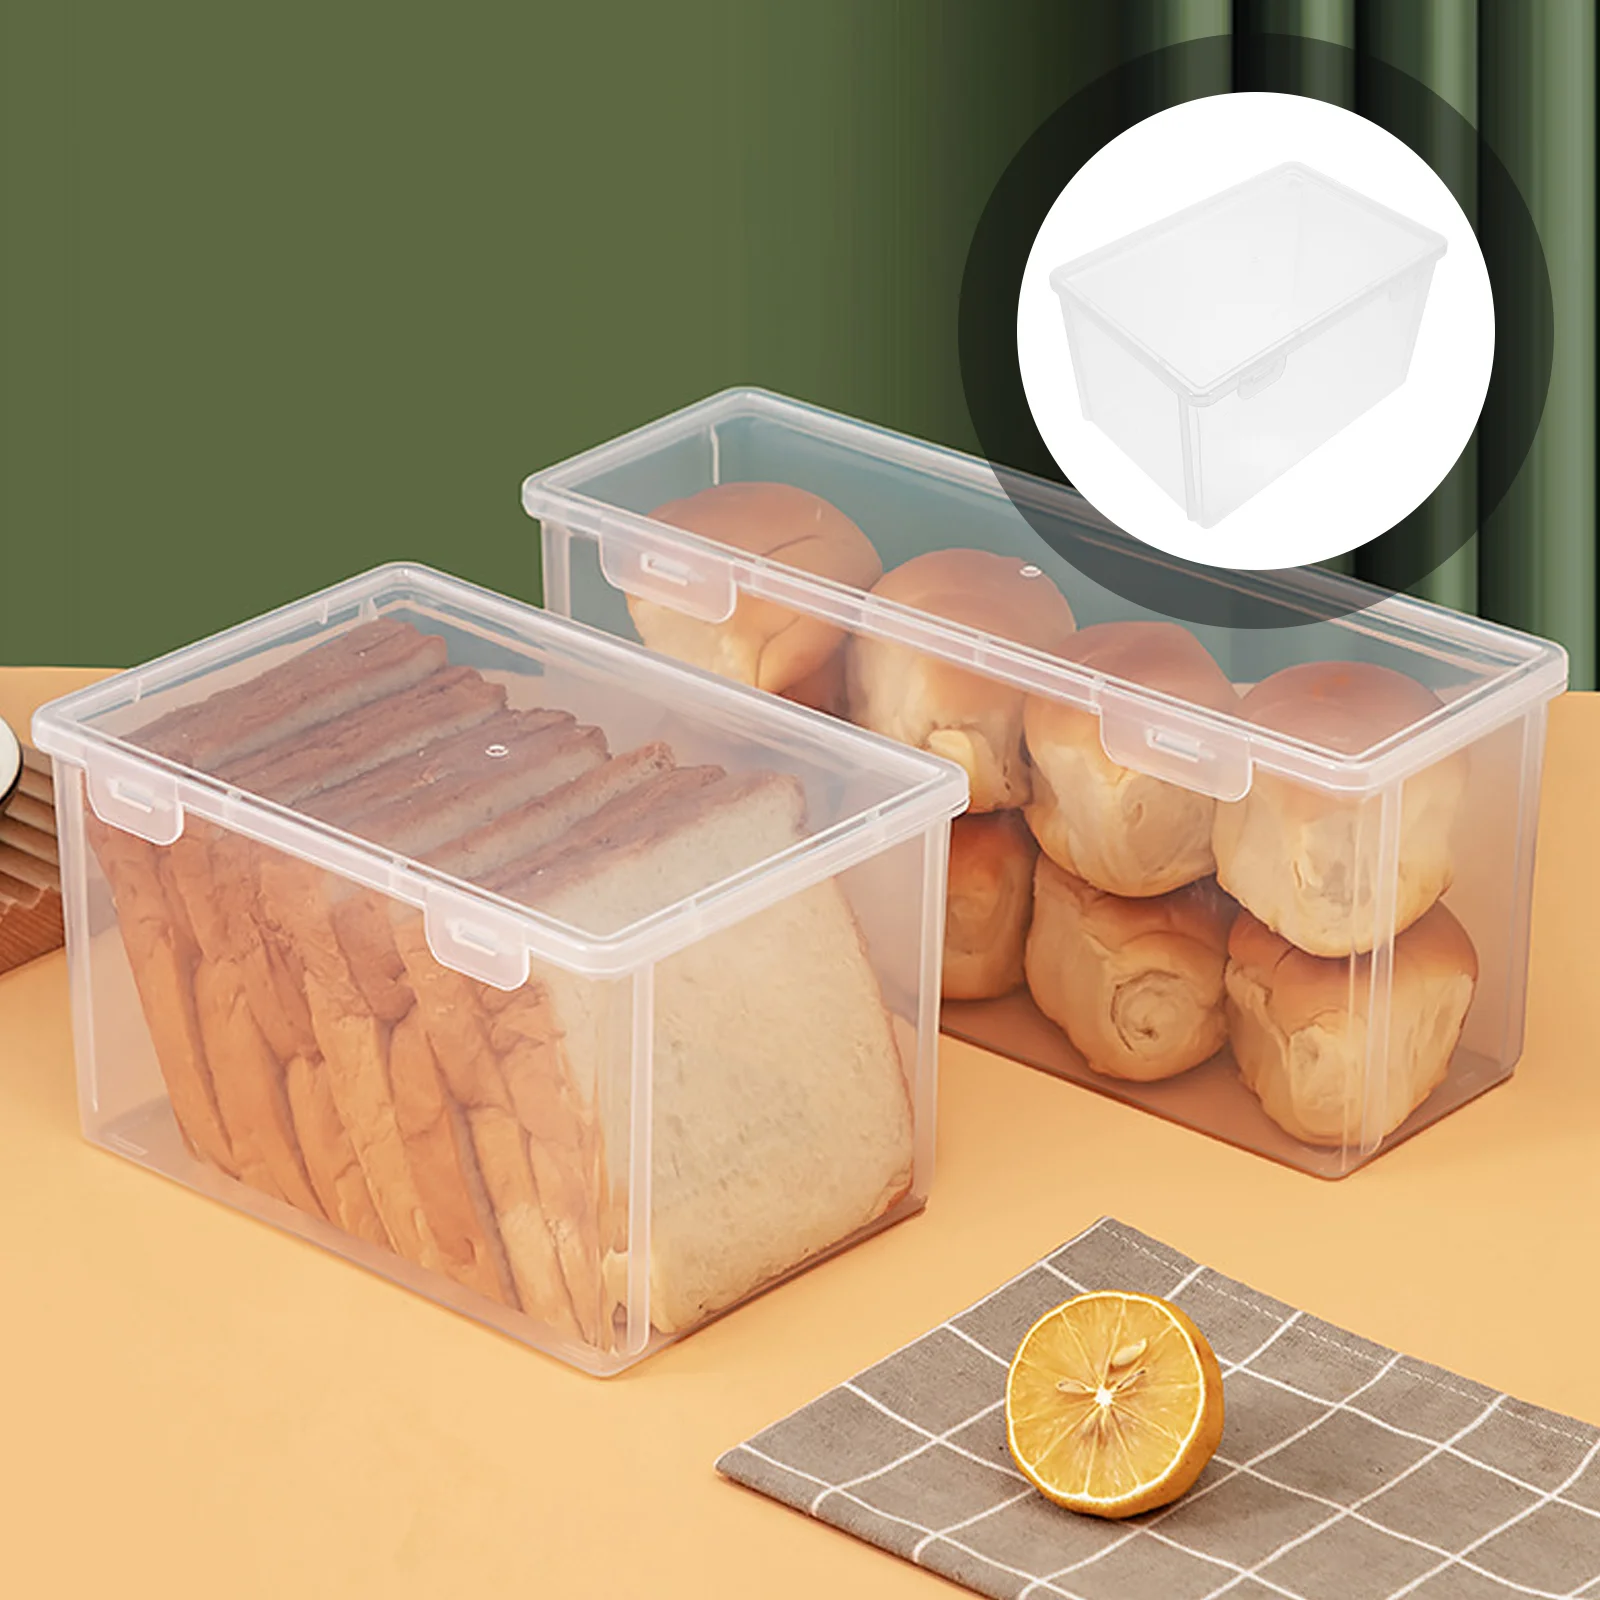 

Bread Container Box Storage Keeper Loaf Dispenserclear Casecontainers Holder Cake Toast Refrigerator Airtight Binwith Kitchen